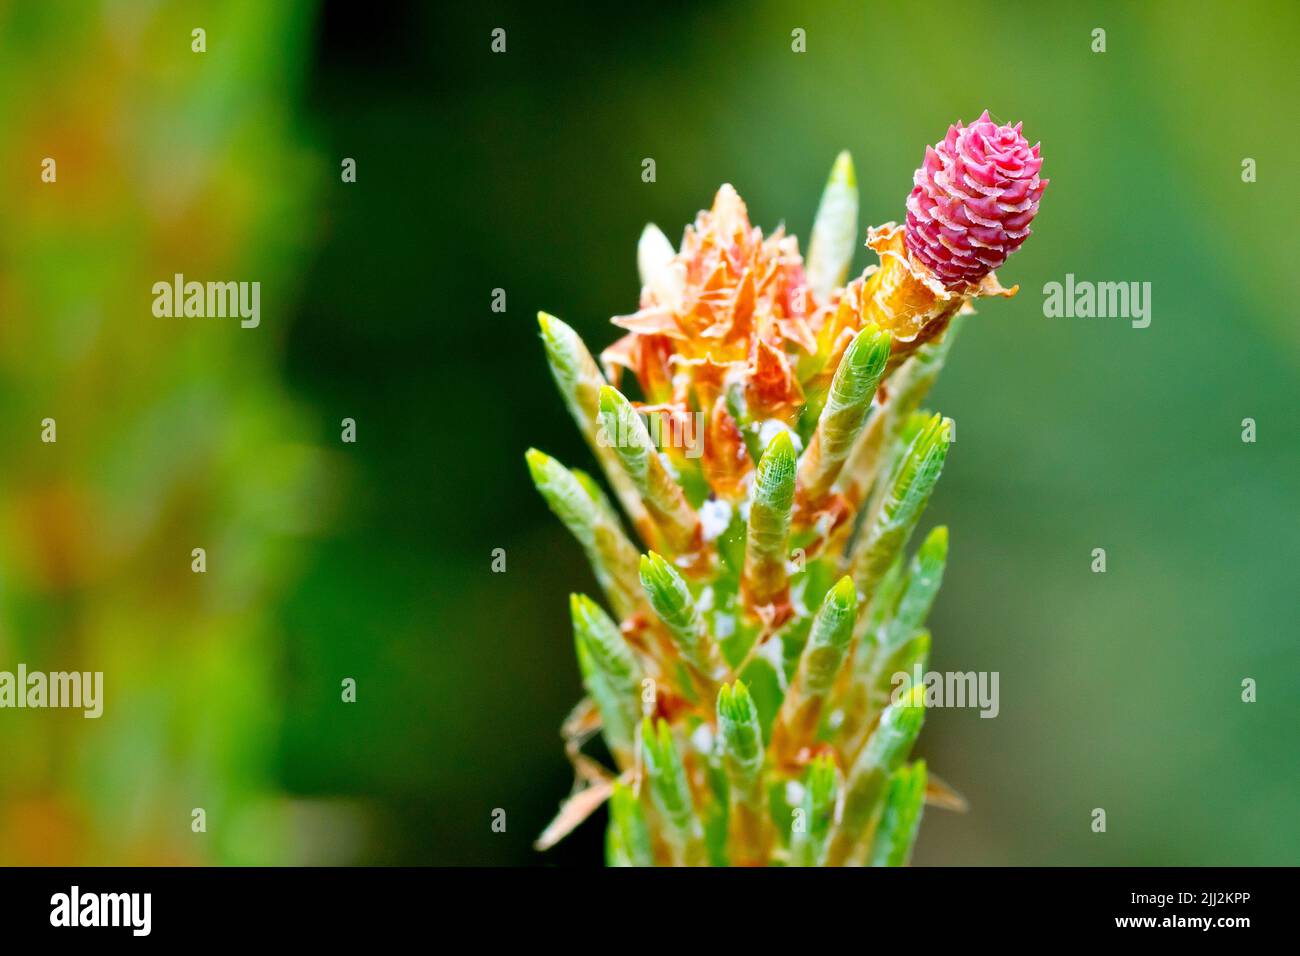 Scot's Pine (pinus sylvestris), close up of the small pink female flower of the tree that appear on the end of new branches in the spring. Stock Photo